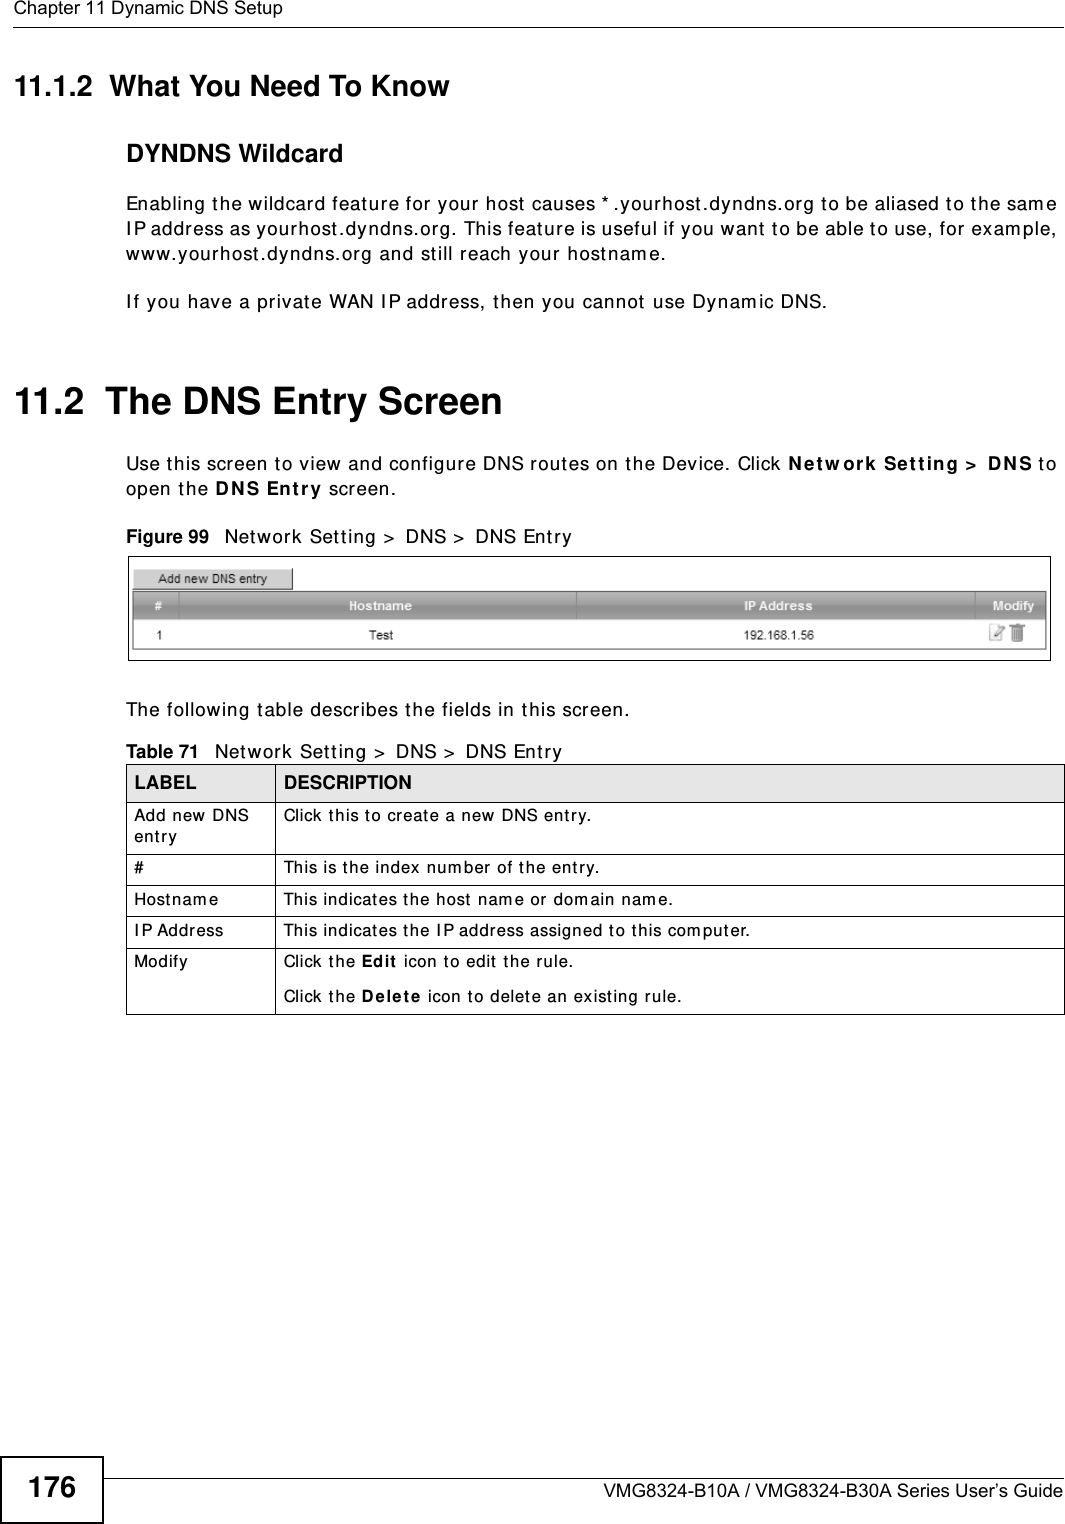 Chapter 11 Dynamic DNS SetupVMG8324-B10A / VMG8324-B30A Series User’s Guide17611.1.2  What You Need To KnowDYNDNS WildcardEnabling the w ildcard feature for your host  causes * .yourhost .dyndns.org t o be aliased to the sam e I P address as yourhost .dyndns.org. This feature is useful if you want t o be able t o use, for exam ple, ww w.yourhost .dyndns.or g and st ill reach your host nam e.I f you have a privat e WAN I P address, t hen you cannot use Dynam ic DNS.11.2  The DNS Entry ScreenUse t his scr een t o view and configure DNS rout es on t he Device. Click N e t w or k  Se t t ing &gt;  D N S to open the D N S En t ry screen.Figure 99   Net work Set t ing &gt;  DNS &gt;  DNS Ent ryThe following t able describes t he fields in t his screen. Table 71   Net work Sett ing &gt;  DNS &gt;  DNS Ent ryLABEL DESCRIPTIONAdd new DNS entryClick t his to creat e a new DNS entry.#This is the index num ber of t he entry.Host nam e This indicates t he host  nam e or dom ain nam e.I P Address This indicat es t he I P address assigned t o t his com put er.Modify Click t he Ed it  icon t o edit  t he rule.Click the D e le t e  icon t o delet e an ex ist ing rule.